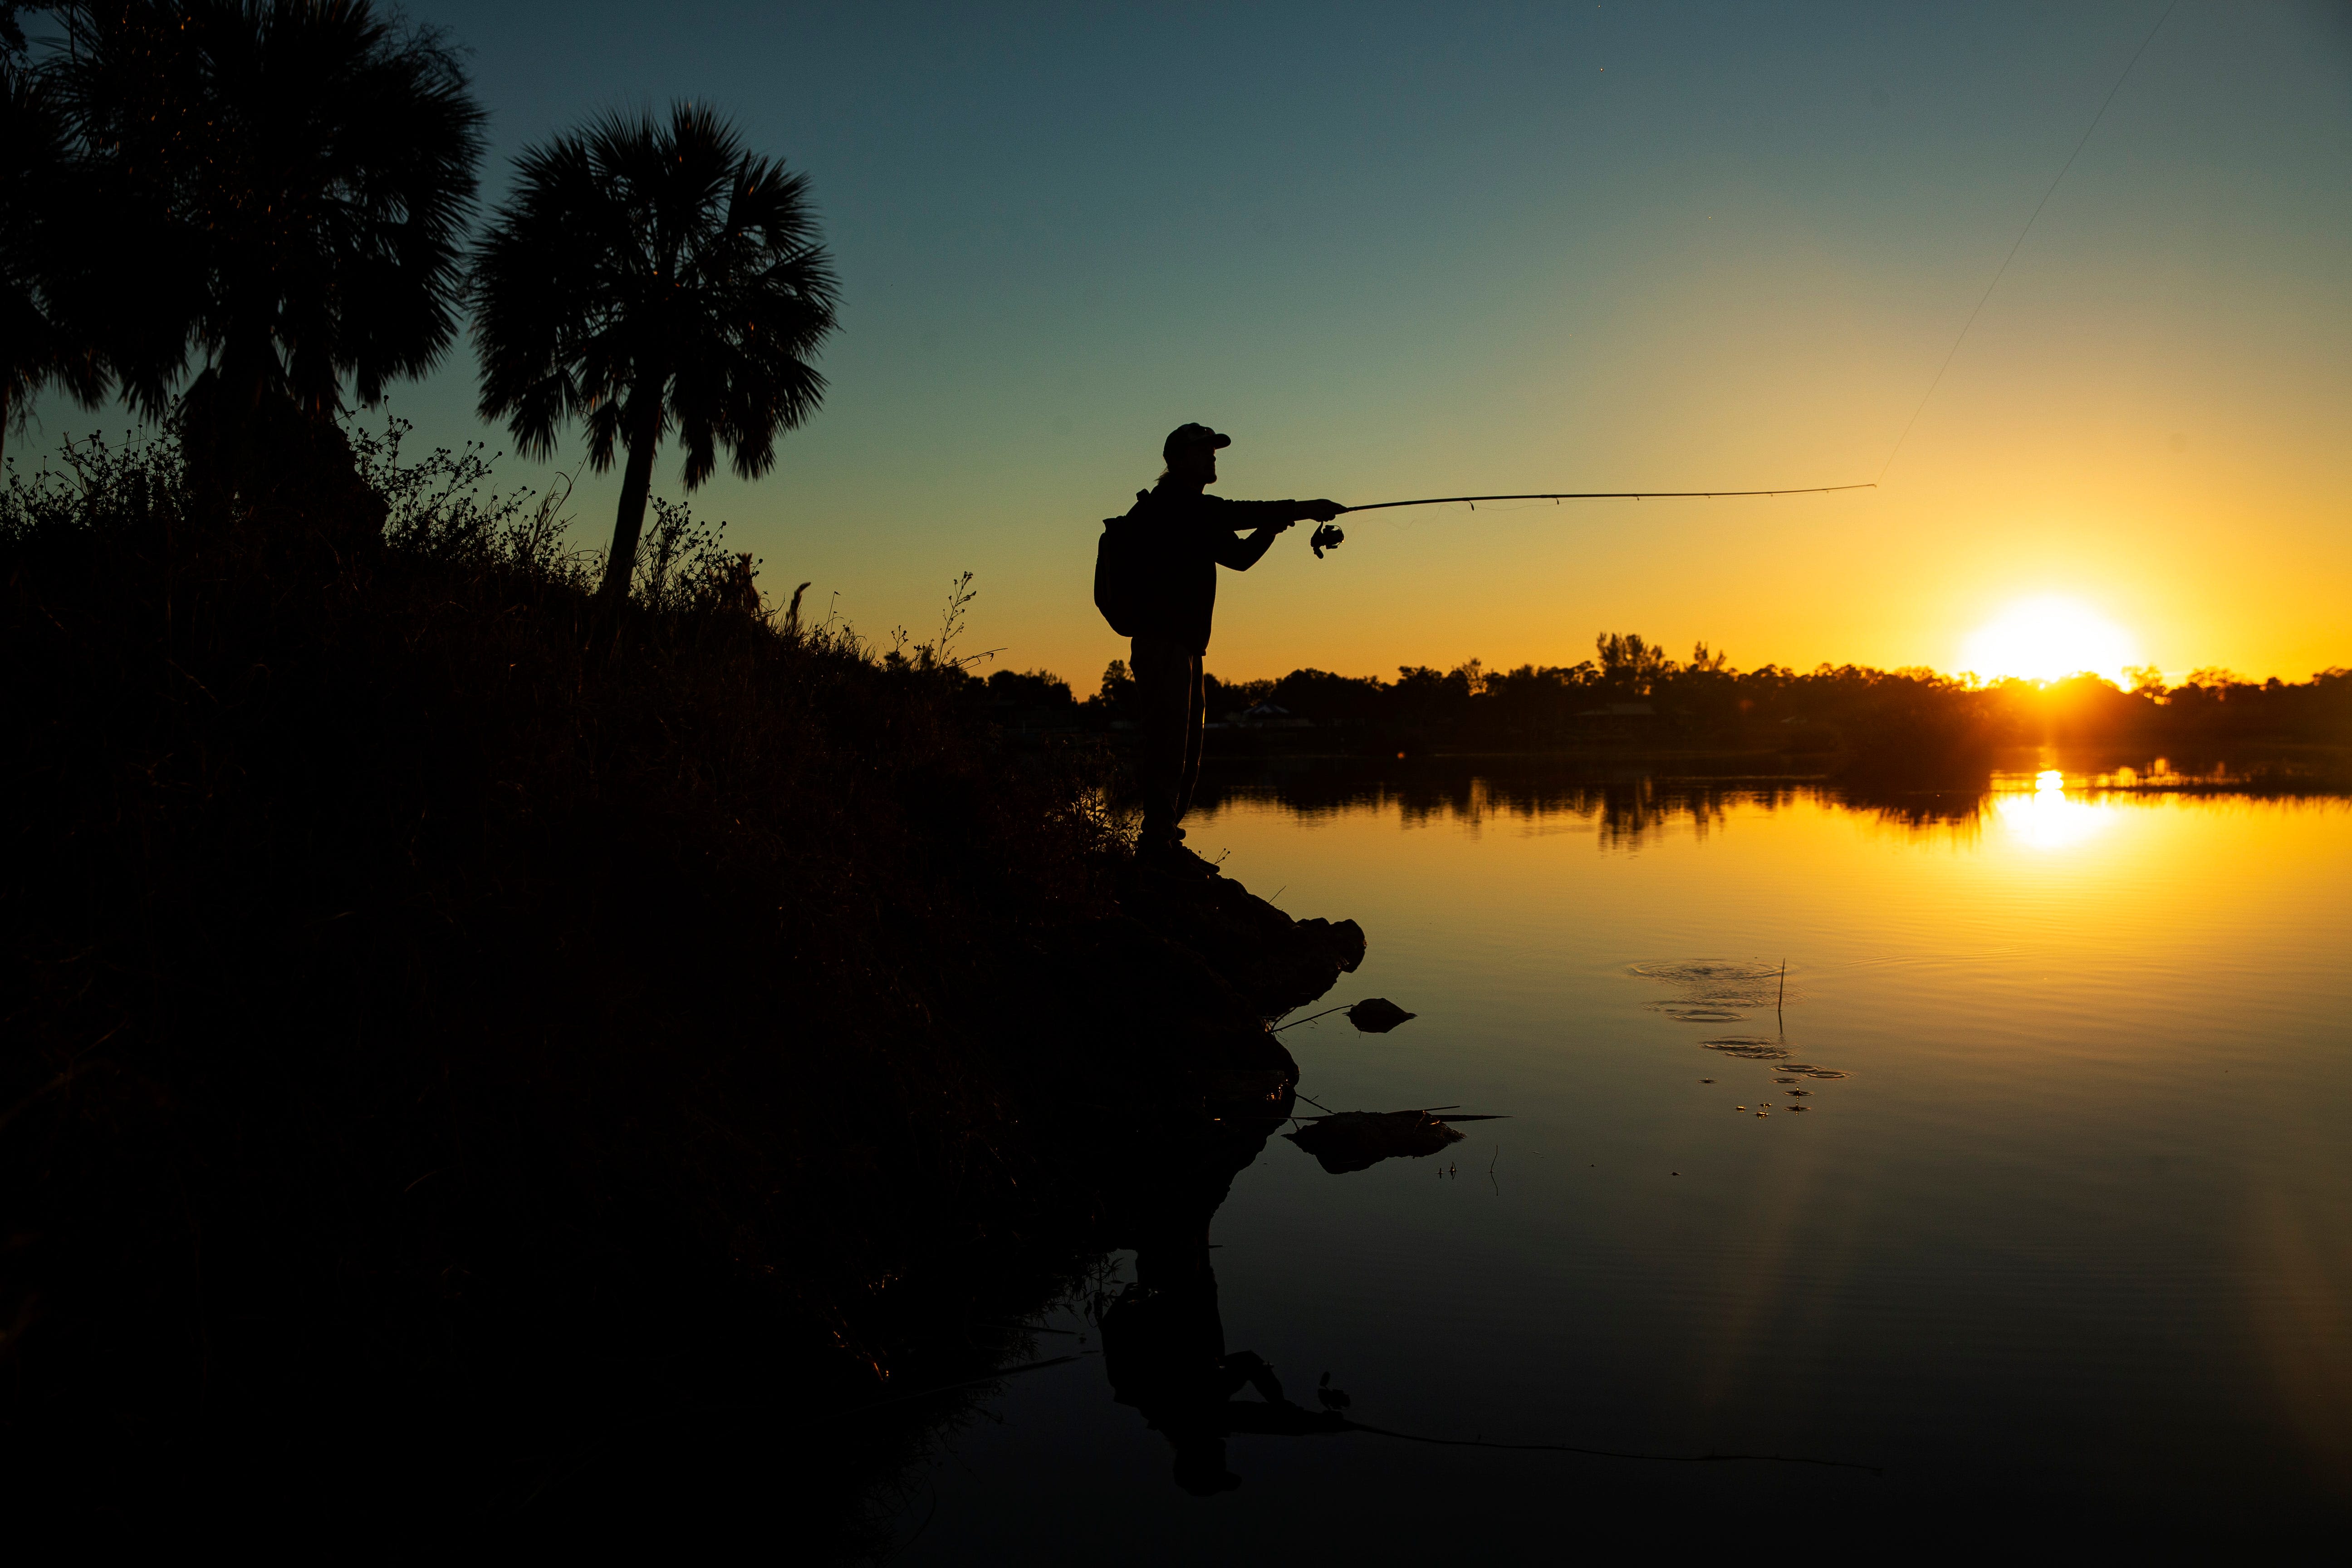 Fishing in Lee County, Florida this summer: Complete guide of what to know